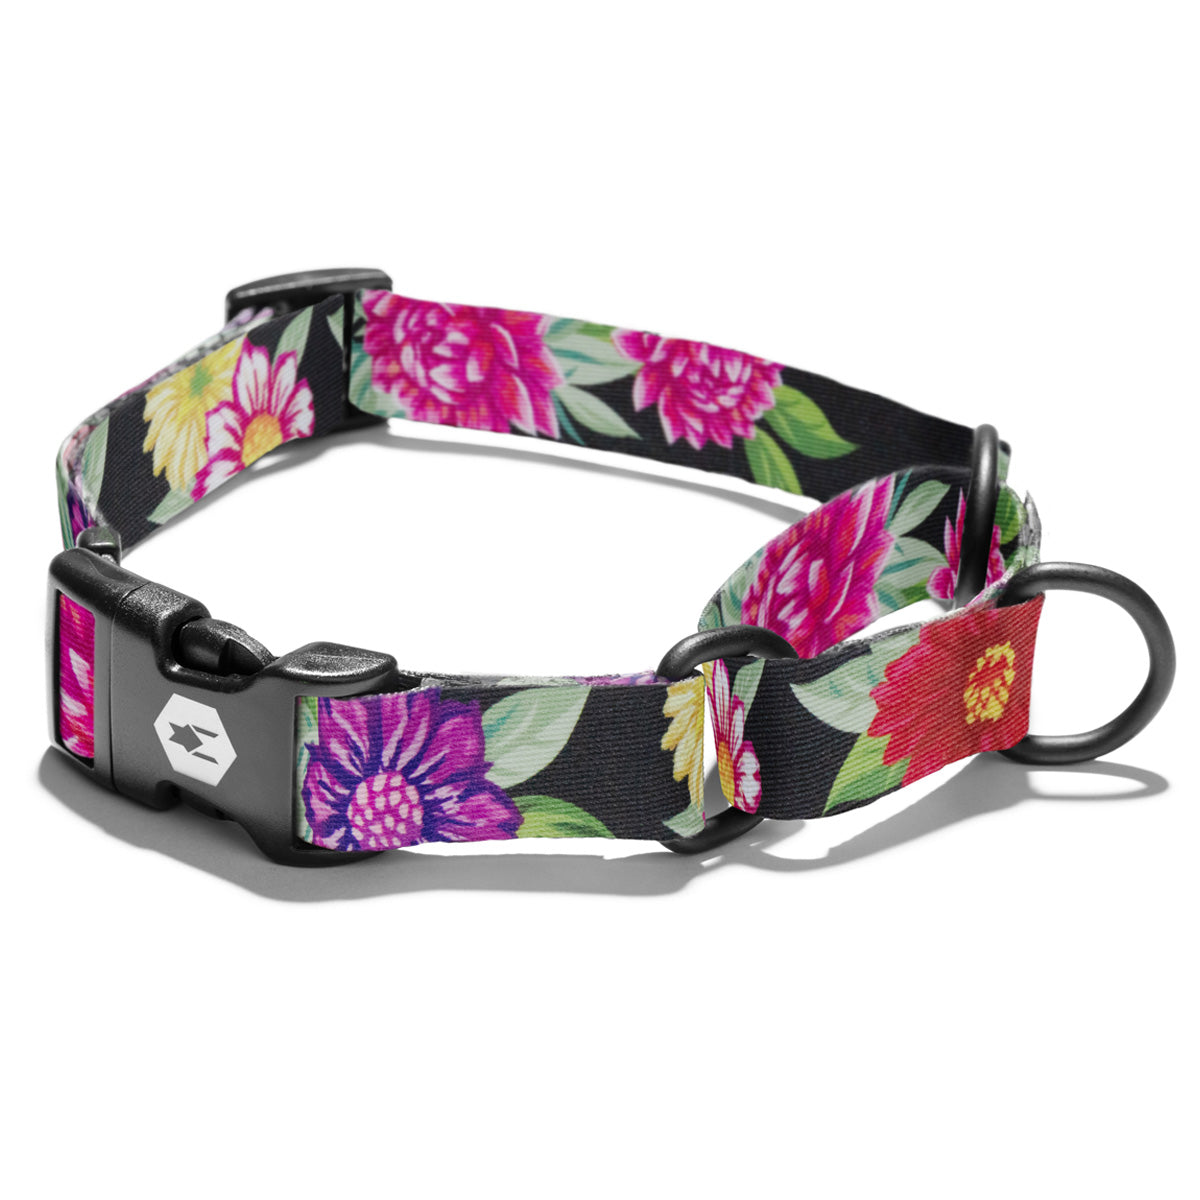 Bright floral pattern on black background on martingale collar.